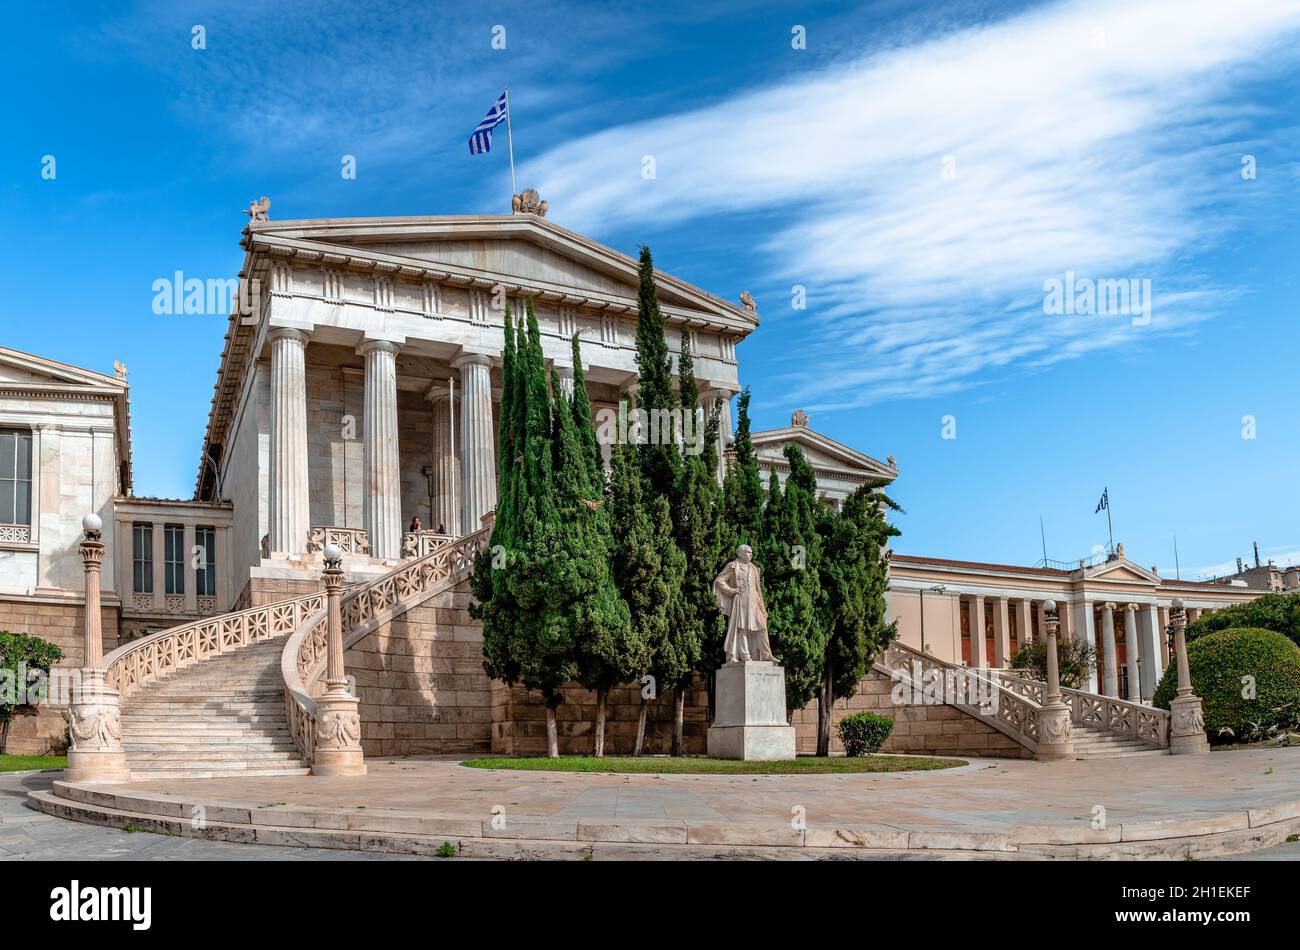 The National Library of Greece, part of the Athenian Trilogy of neo-classical buildings in Panepistimiou St, in the centrer of Athens. Stock Photo